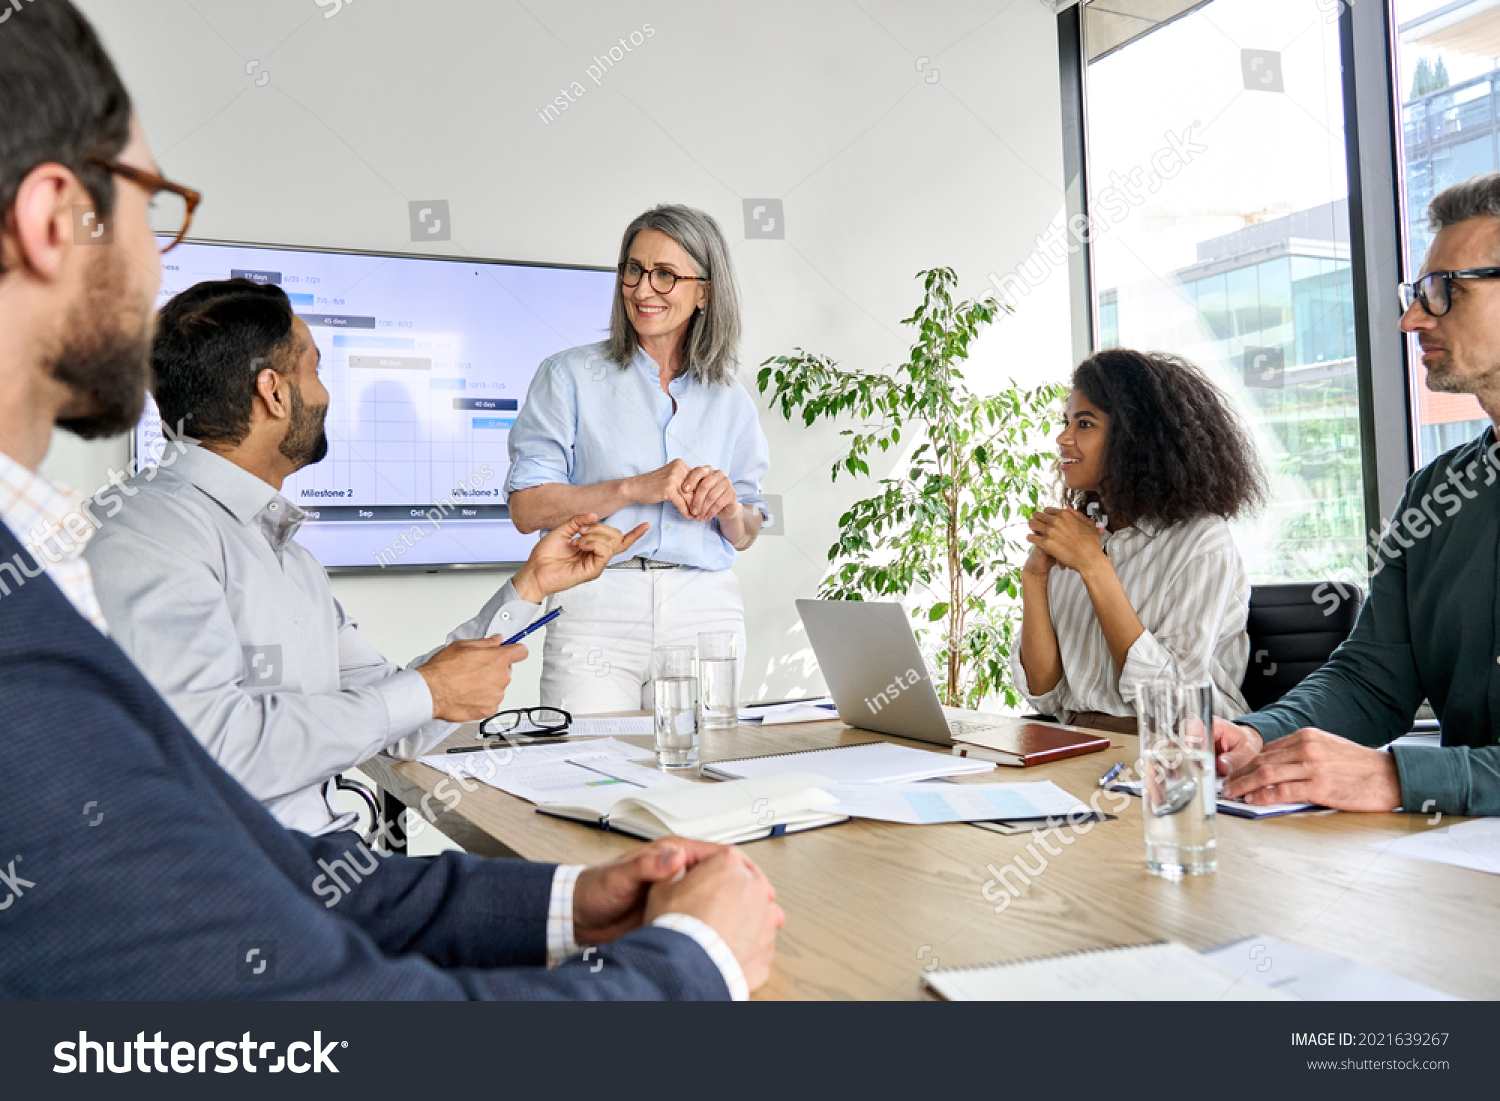 International executive team people having board meeting discussing project results. Diverse employees group working with senior leader brainstorming in office meeting room at presentation training. #2021639267